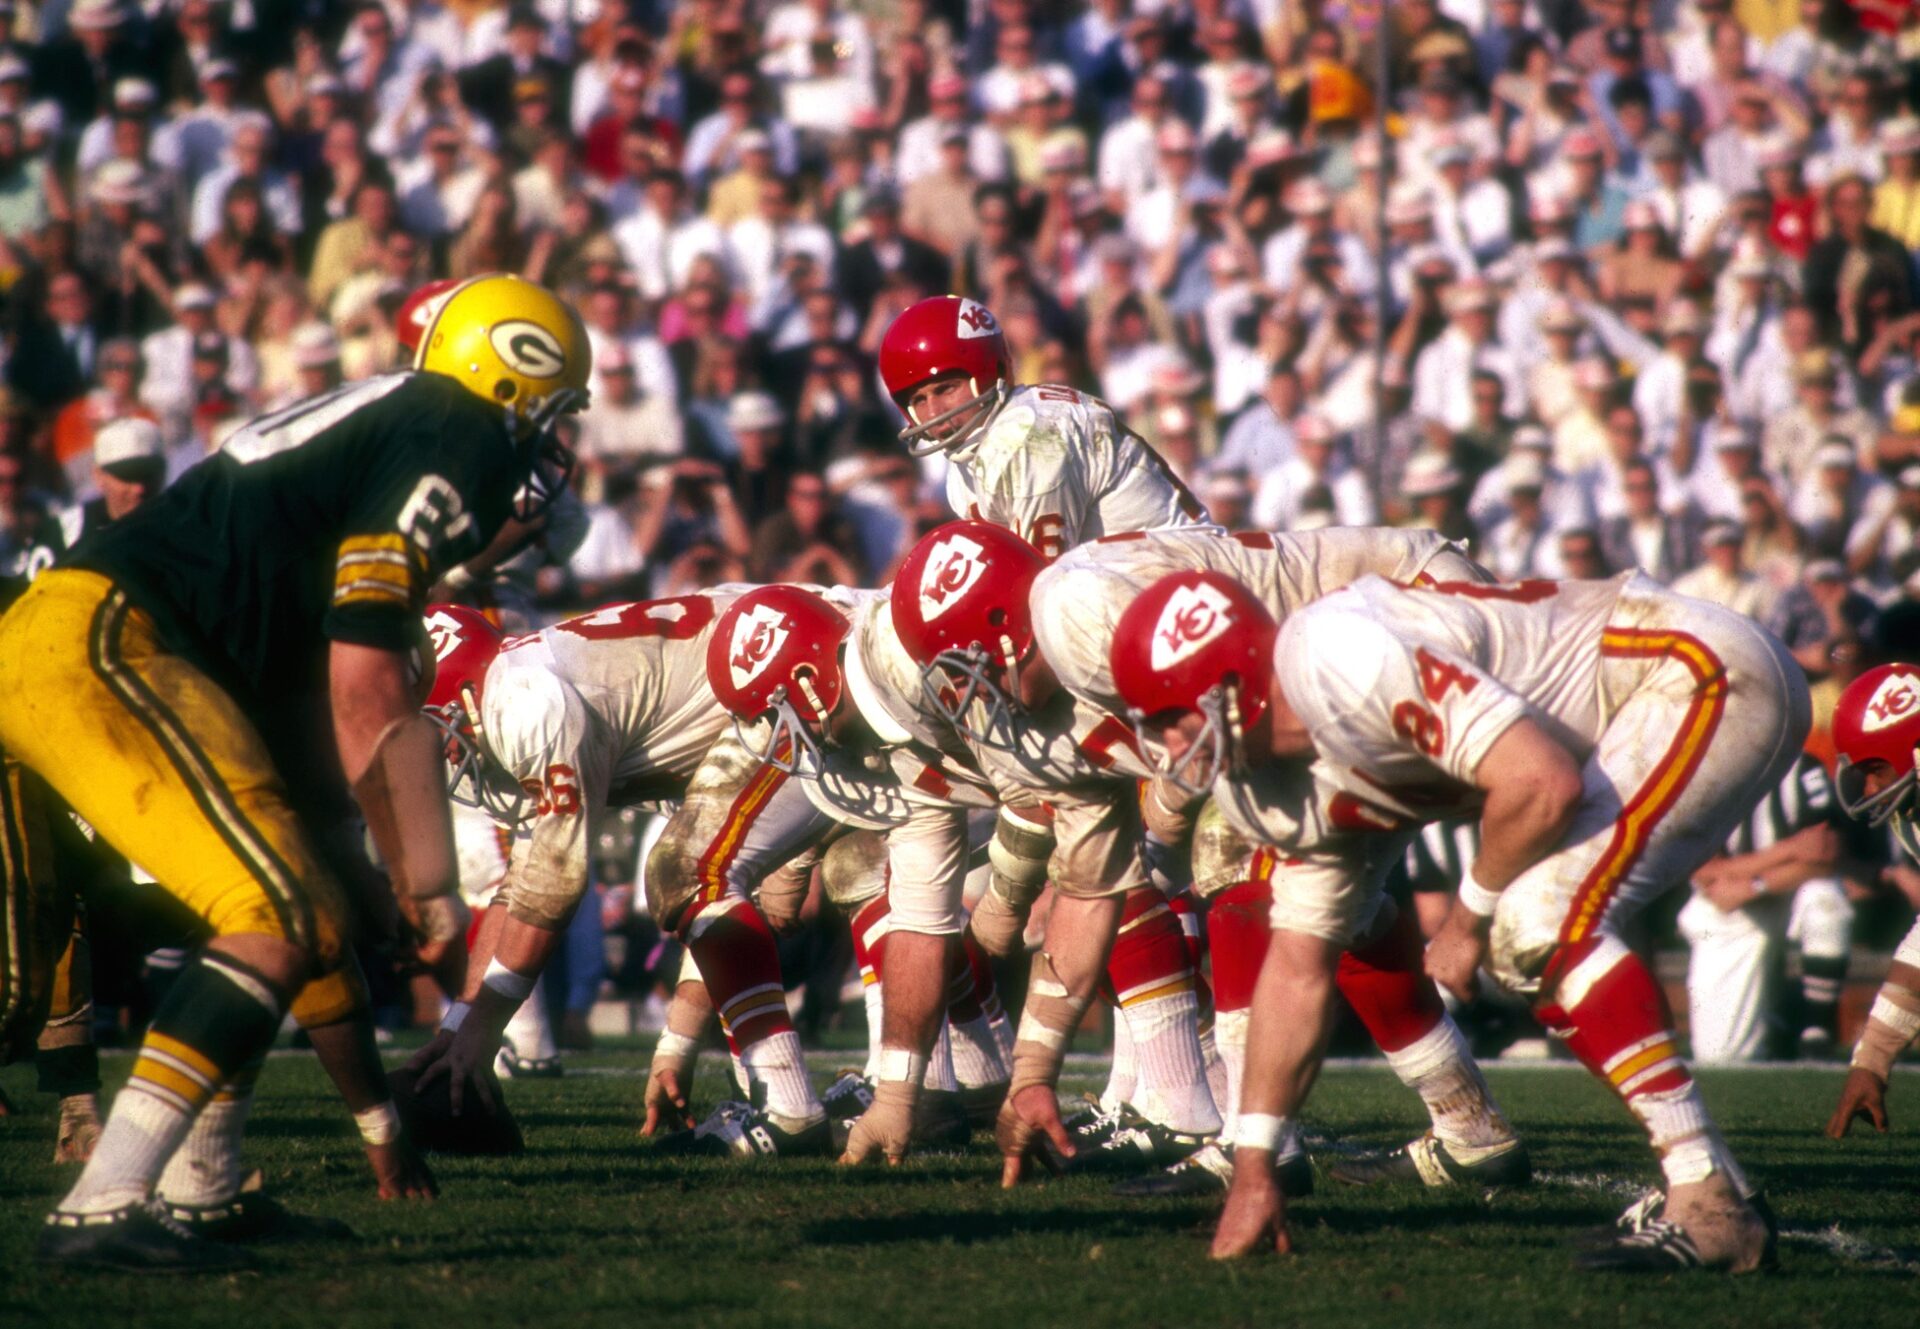 Kansas City Chiefs quarterback Len Dawson (16) at the line of scrimmage against the Green Bay Packers during Super Bowl I at the Los Angeles Coliseum.